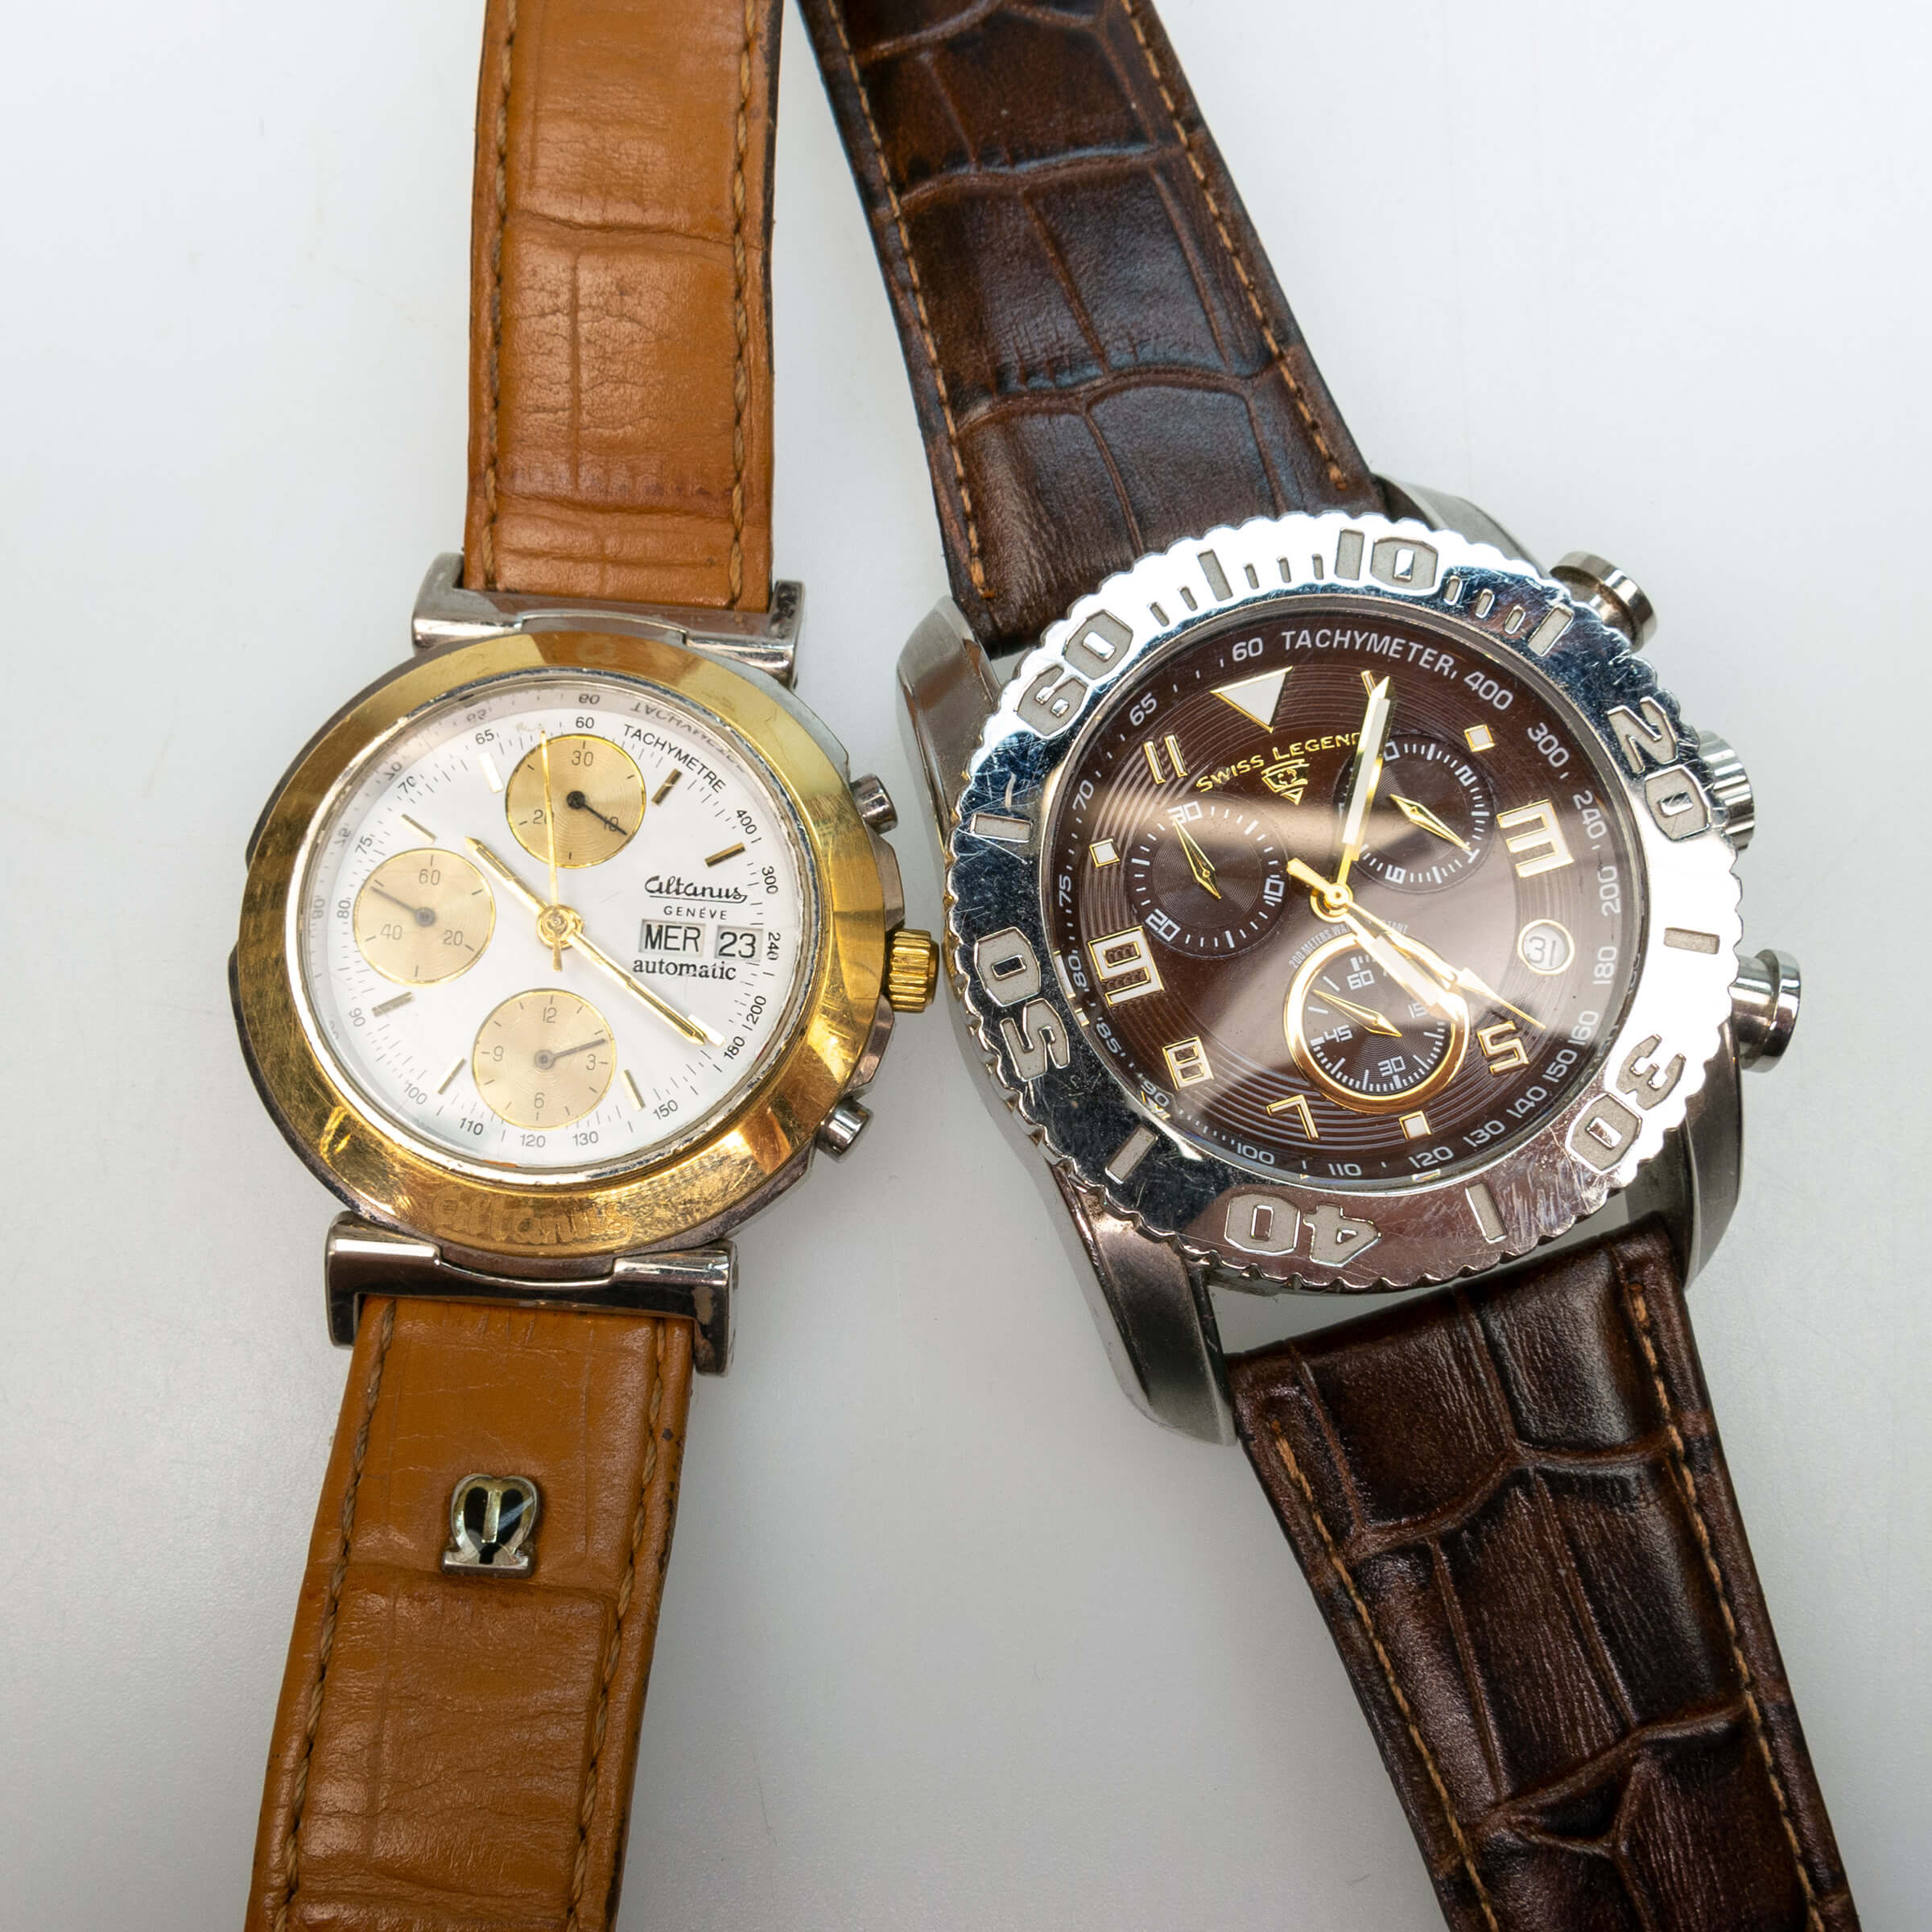 Atlanus And Swiss Legend Wristwatches With Chronographs